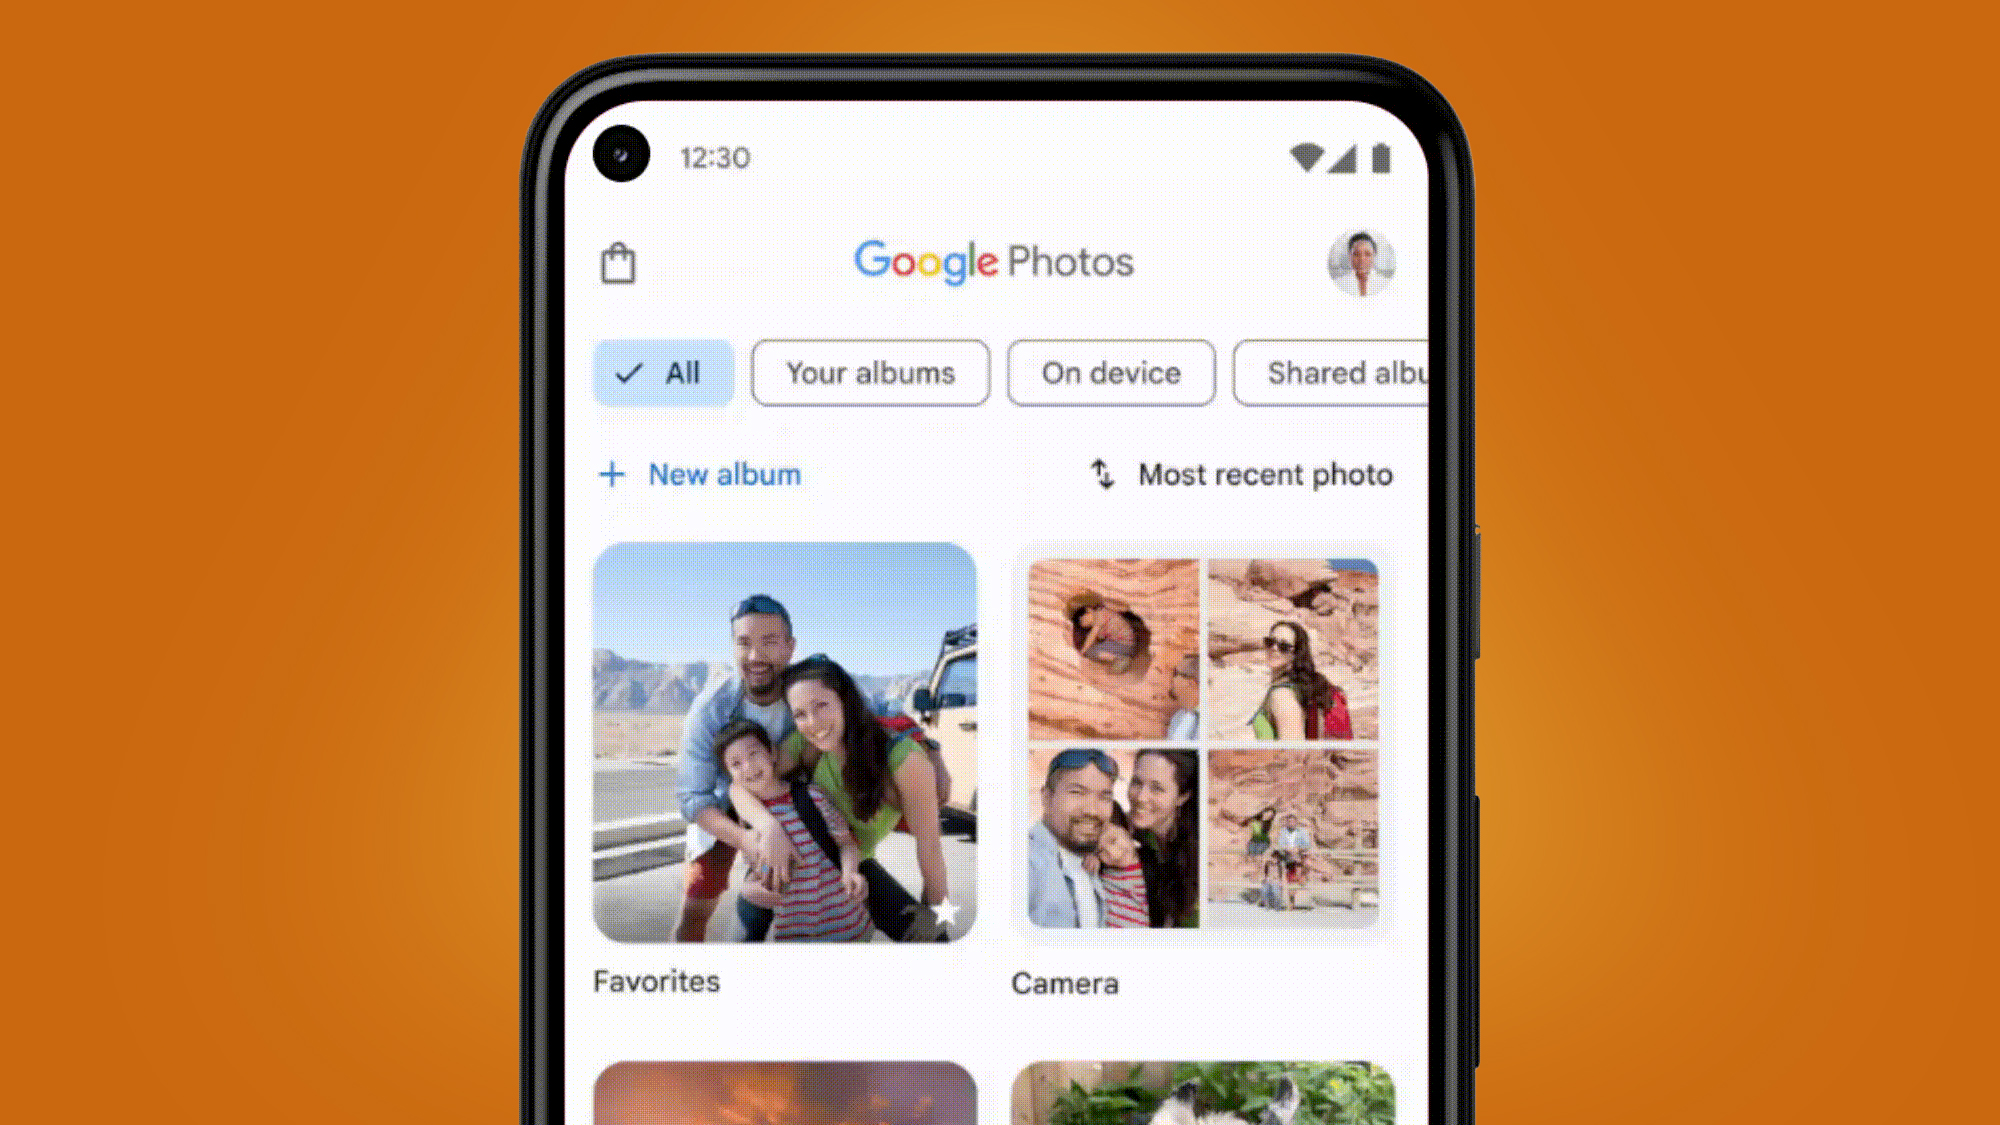 A smartphone screen showing the Google Photos app